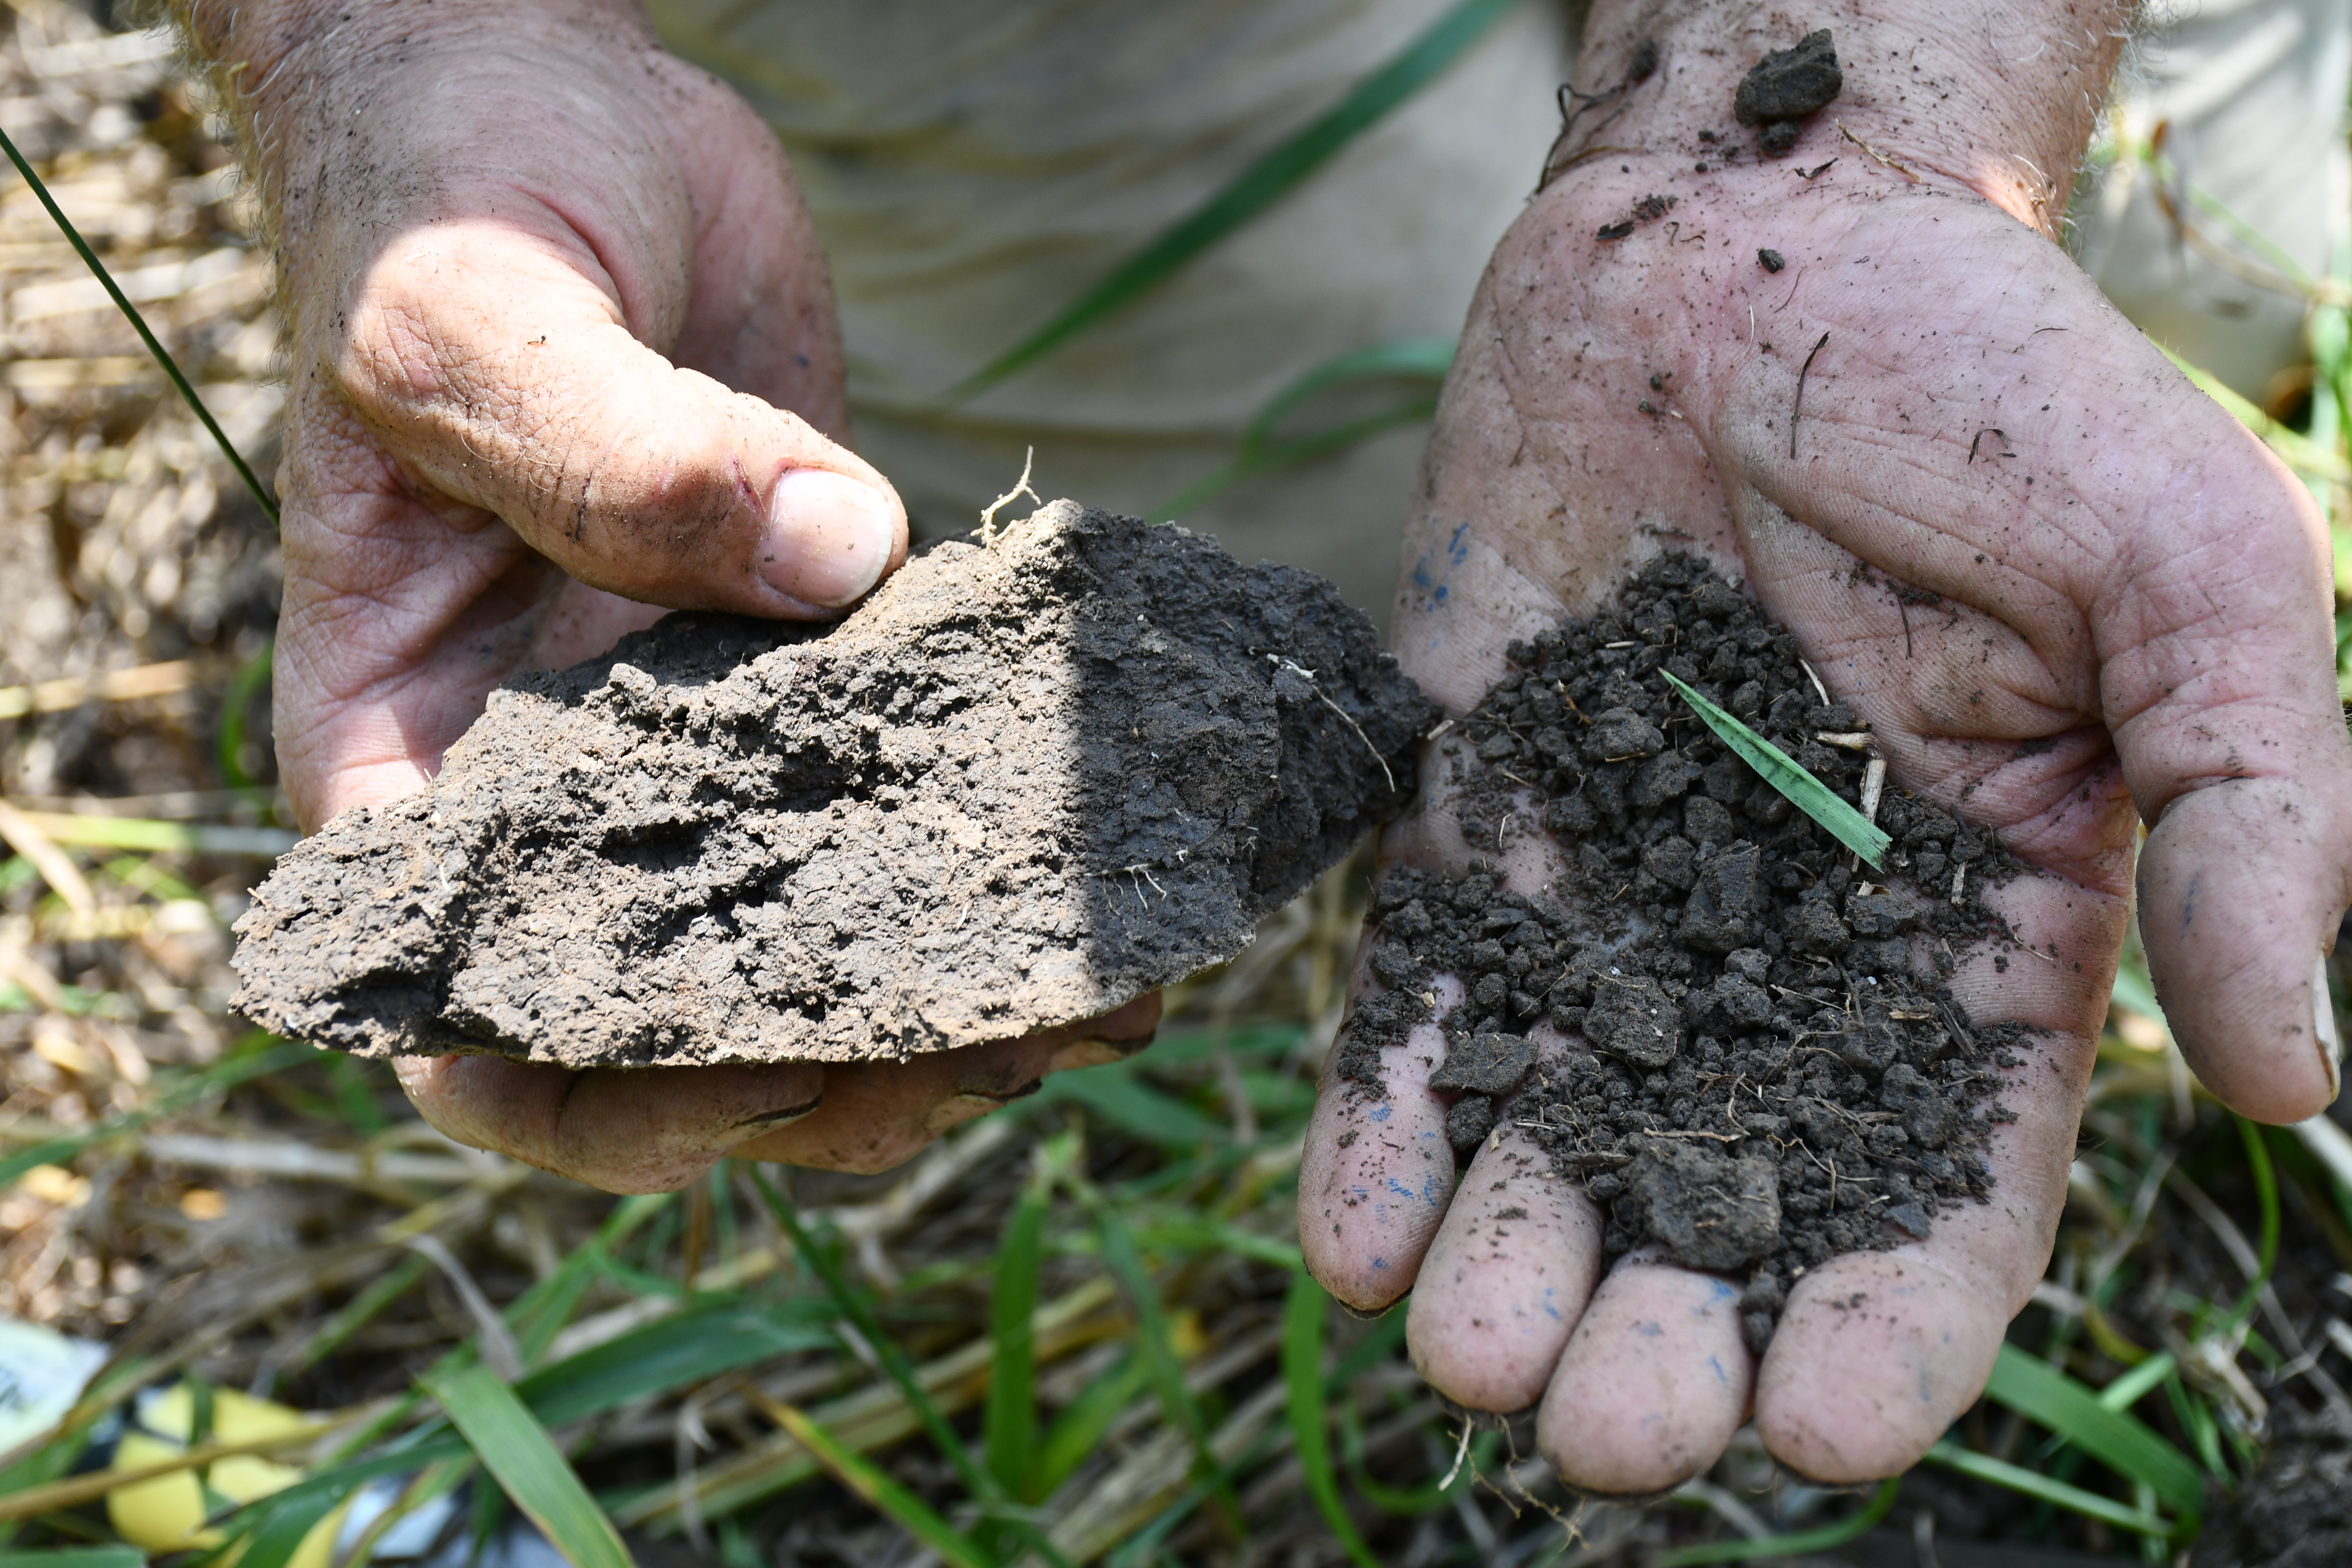 Hands holding healthy soil vs. compacted soil that clumps together